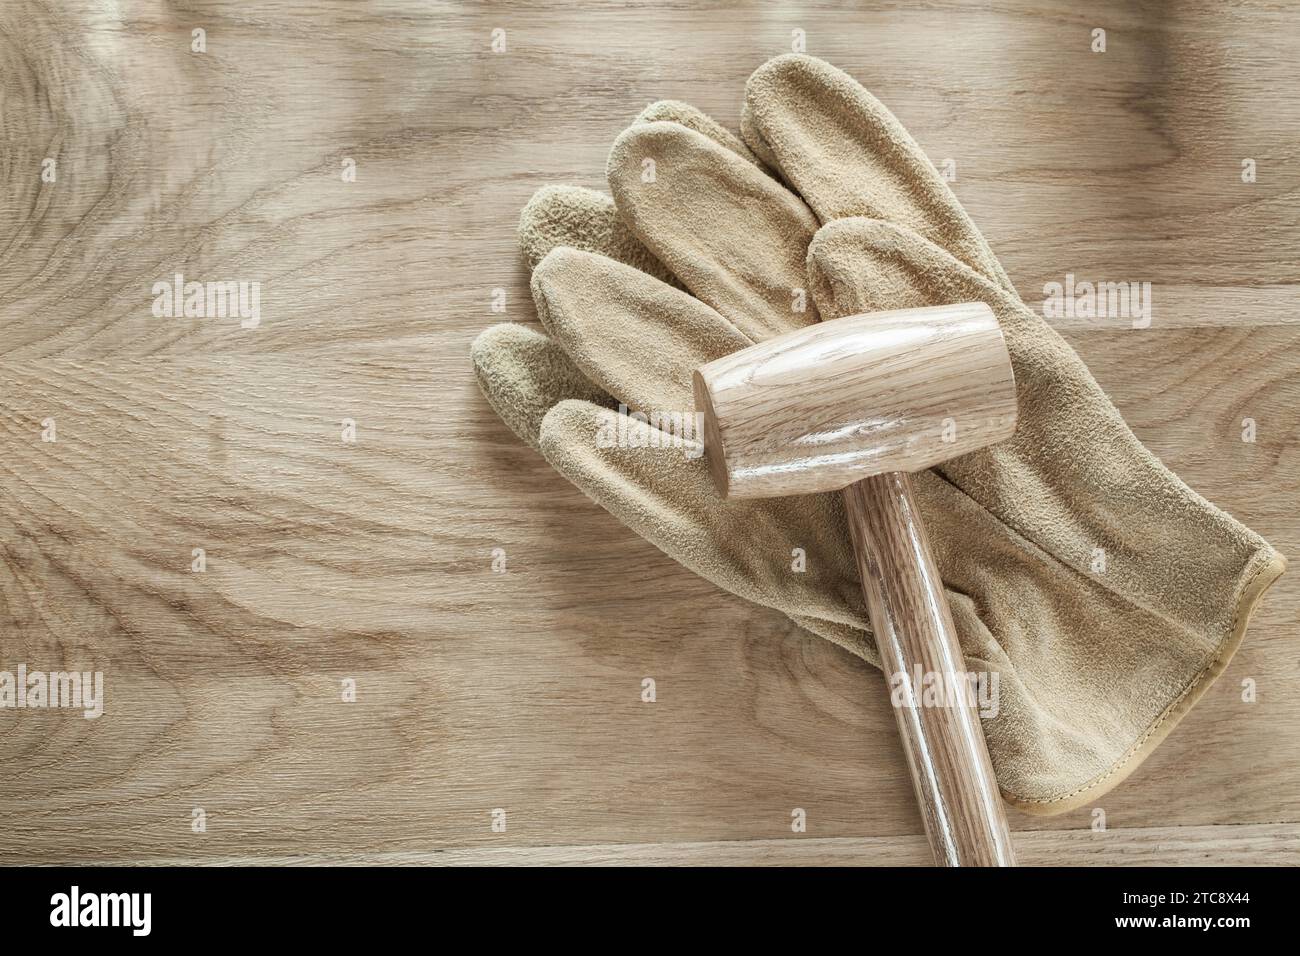 Leather protective gloves Block hammer on wooden board Stock Photo